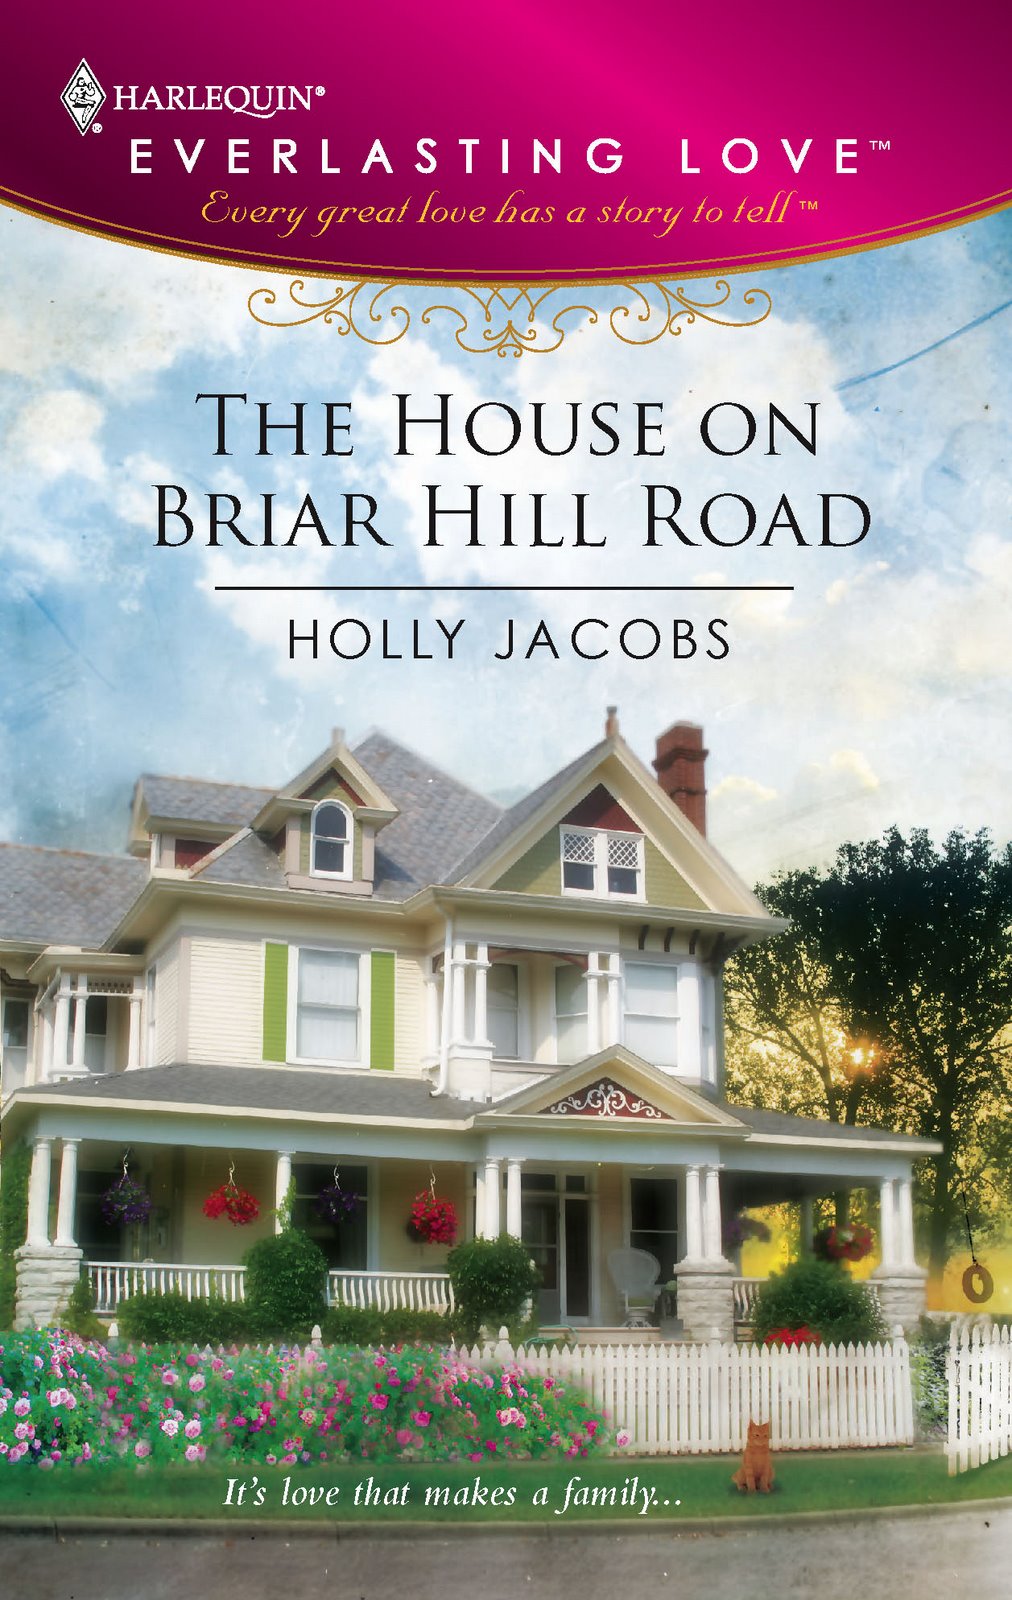 [THE+HOUSE+ON+BRIAR+HILL+ROAD.jpg]